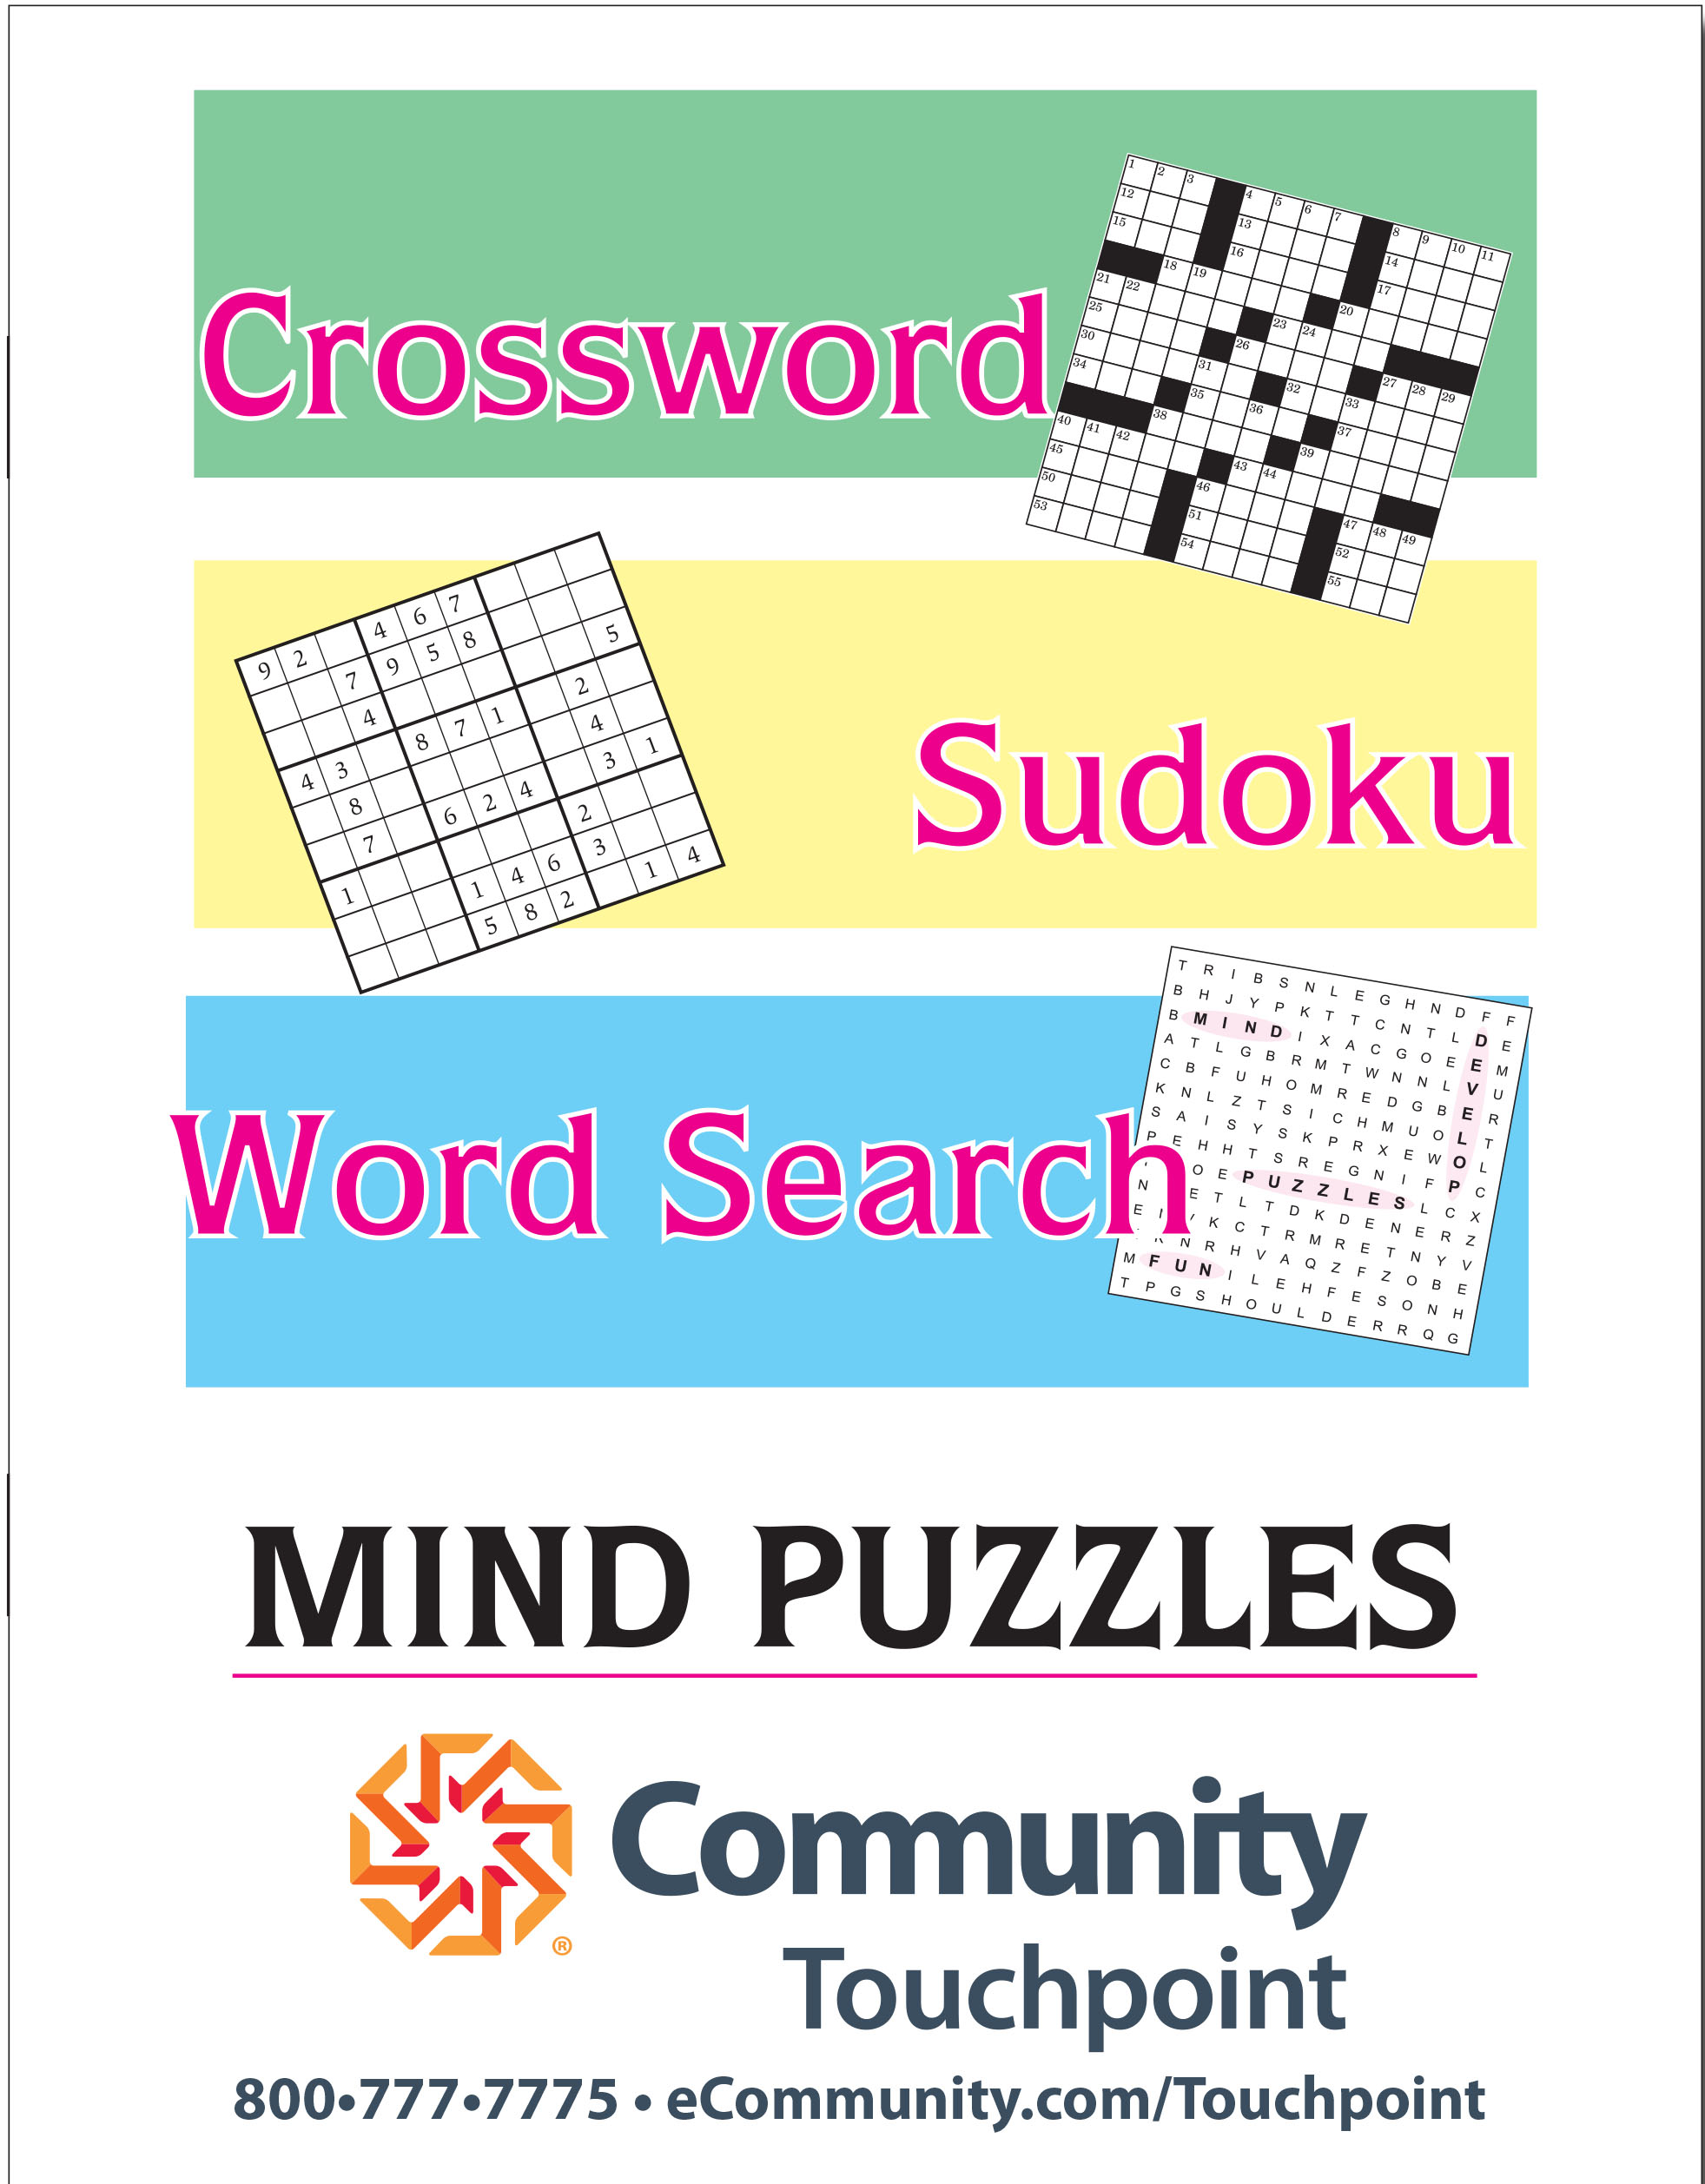 4 x 4 Sudoku for Kids: 150 Puzzles